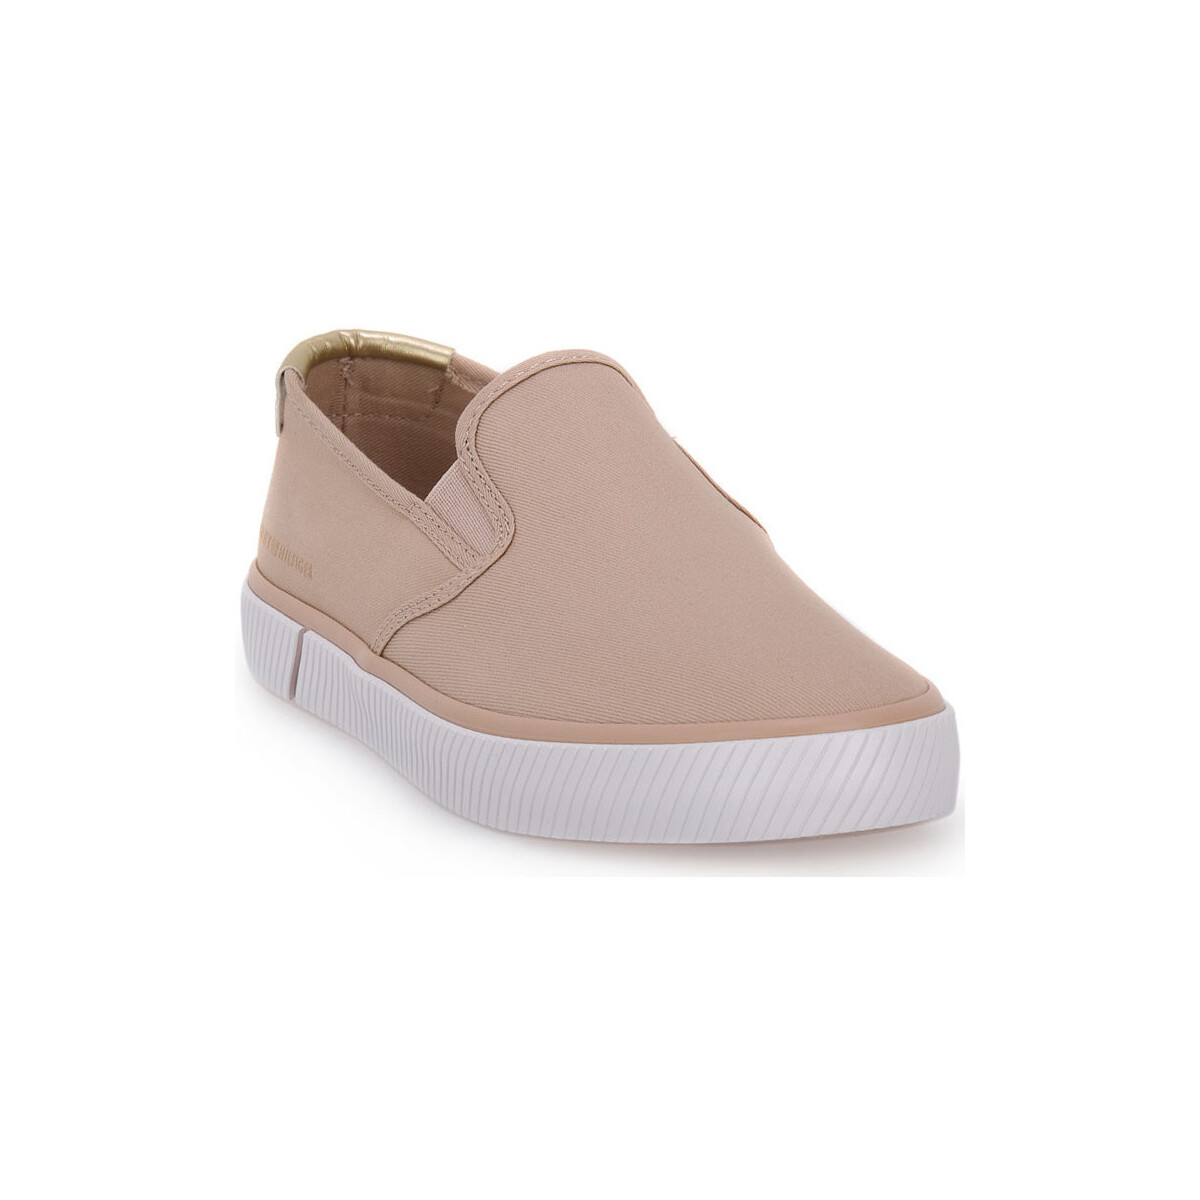 Sneakers Tommy Hilfiger TRY SLIP ON Ροζ